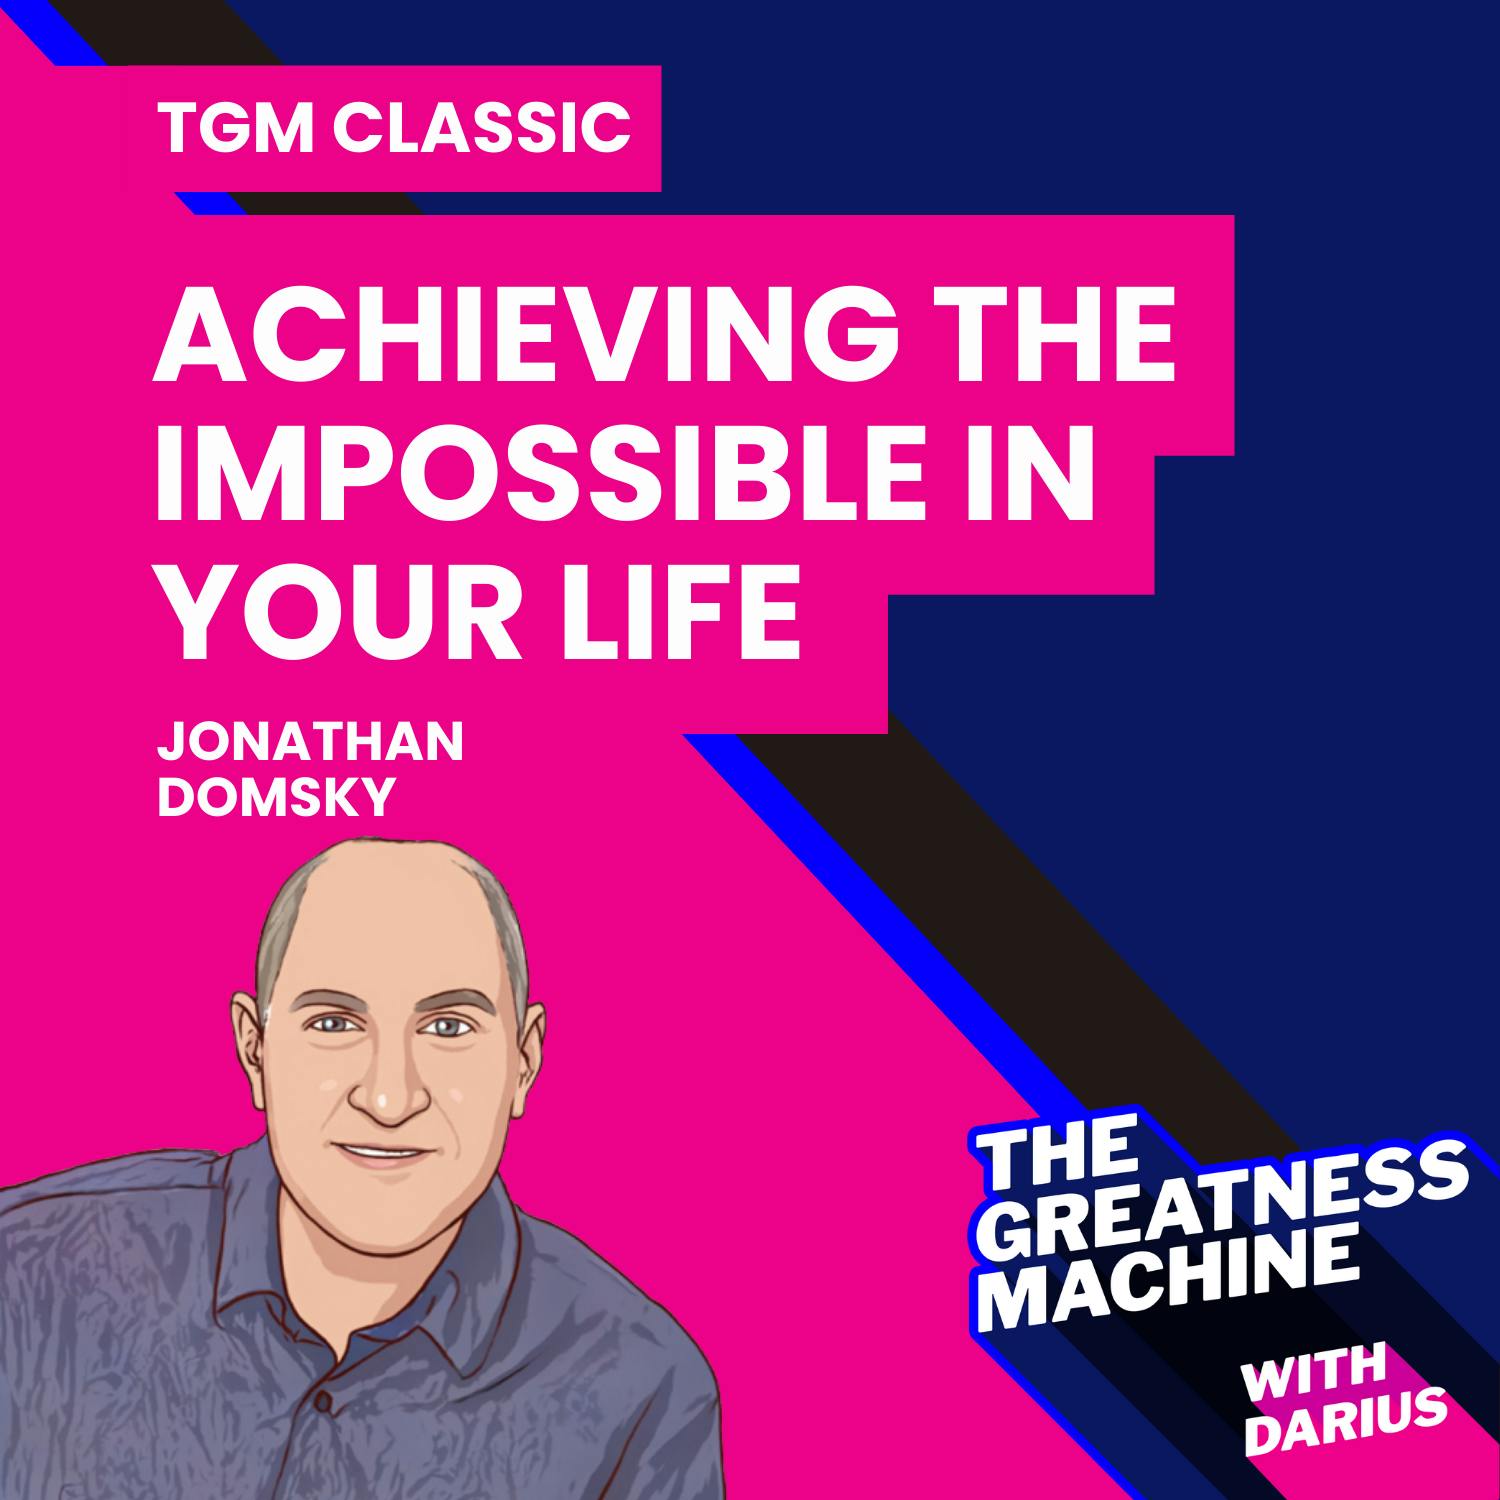 TGM Classic | Jonathan Domsky | Create Your Greatness in the World: Using Affirmations, Declarations and Vision to Achieve the Impossible in Your Life